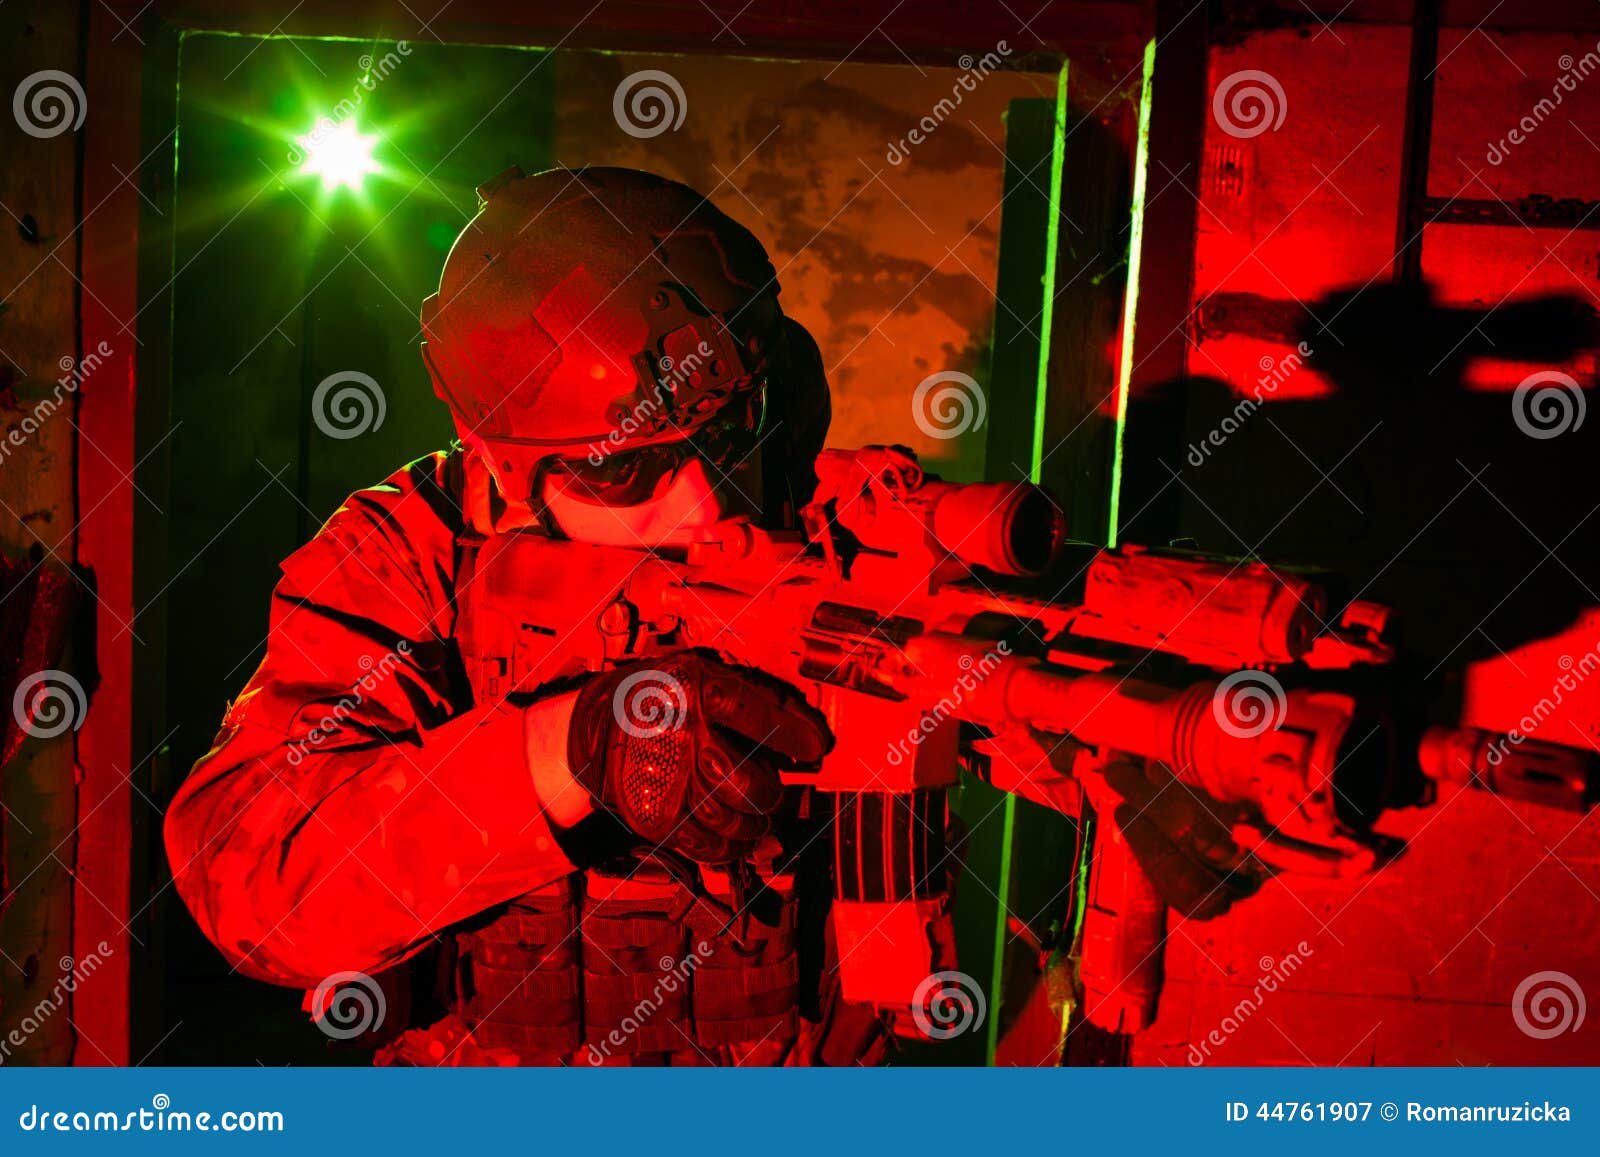 special forces soldier during night mission